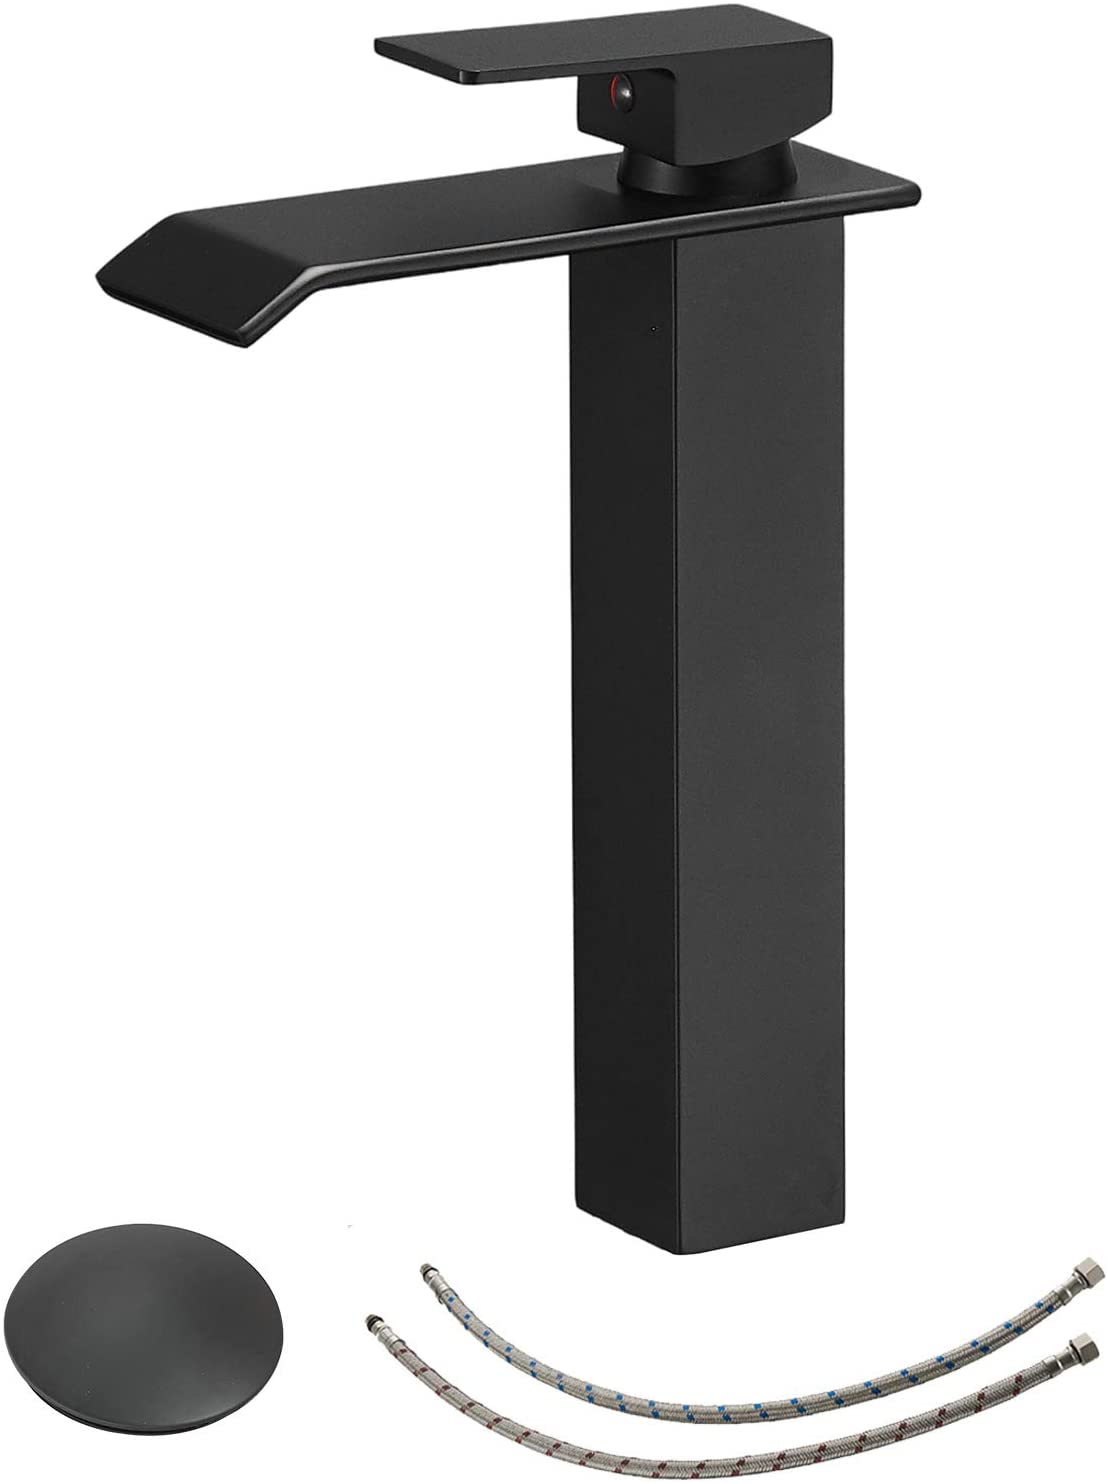 BWE Vessel Sink Faucet with Drain Assembly Without Overflow and Supply Hose Lead-Free Lavatory Waterfall Black Bathroom Faucet Single Handle One Hole Mixer Tap Tall Body Matte - image 1 of 9